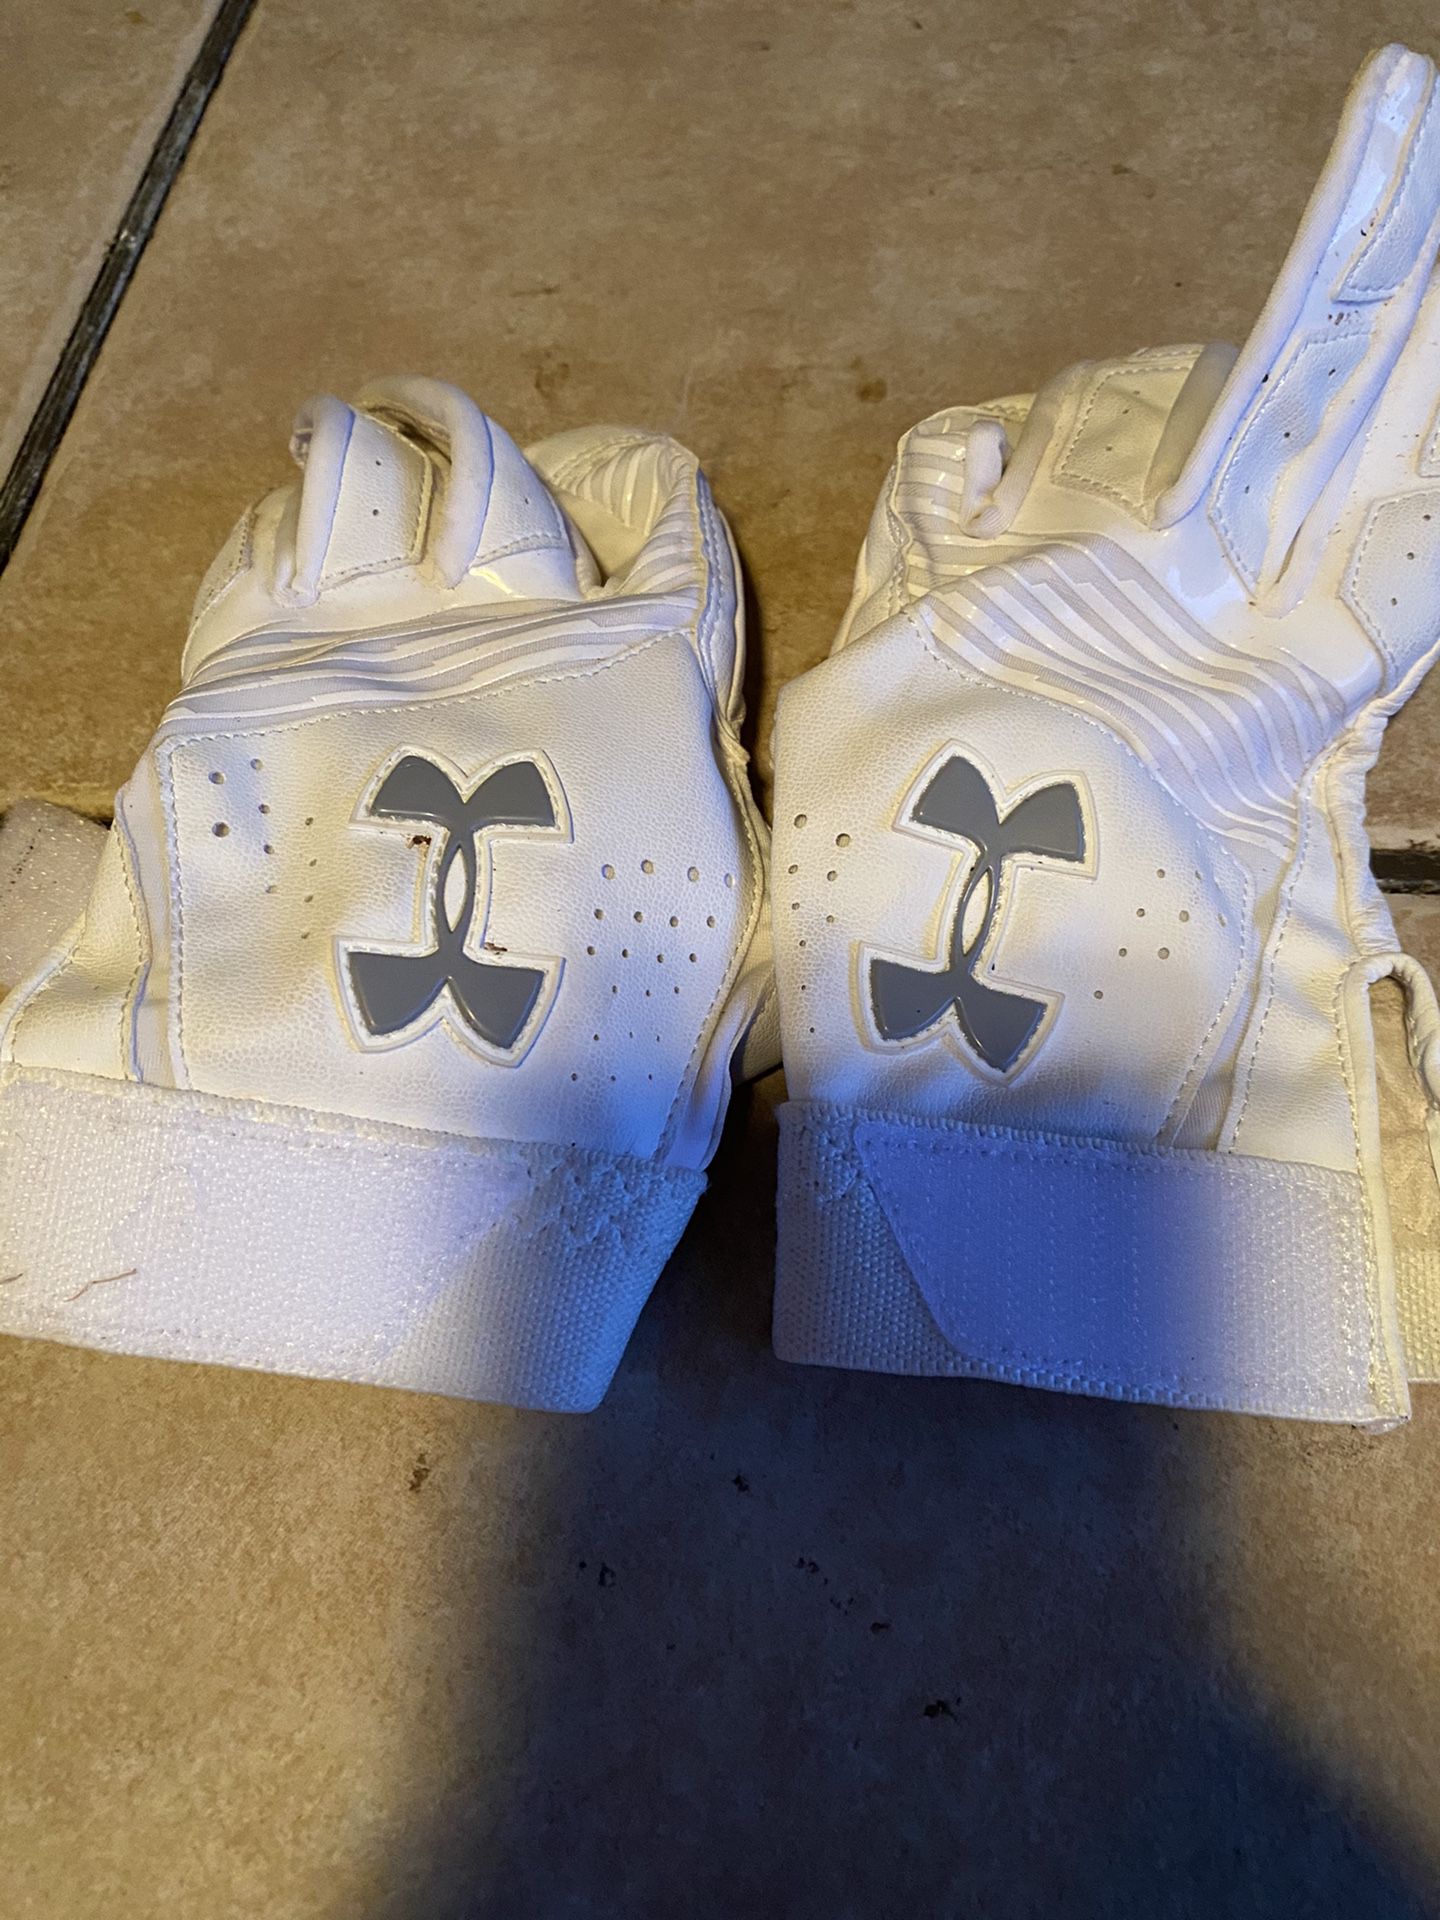 Under Armor left and right batting gloves Youth LG used in Girls Softball.